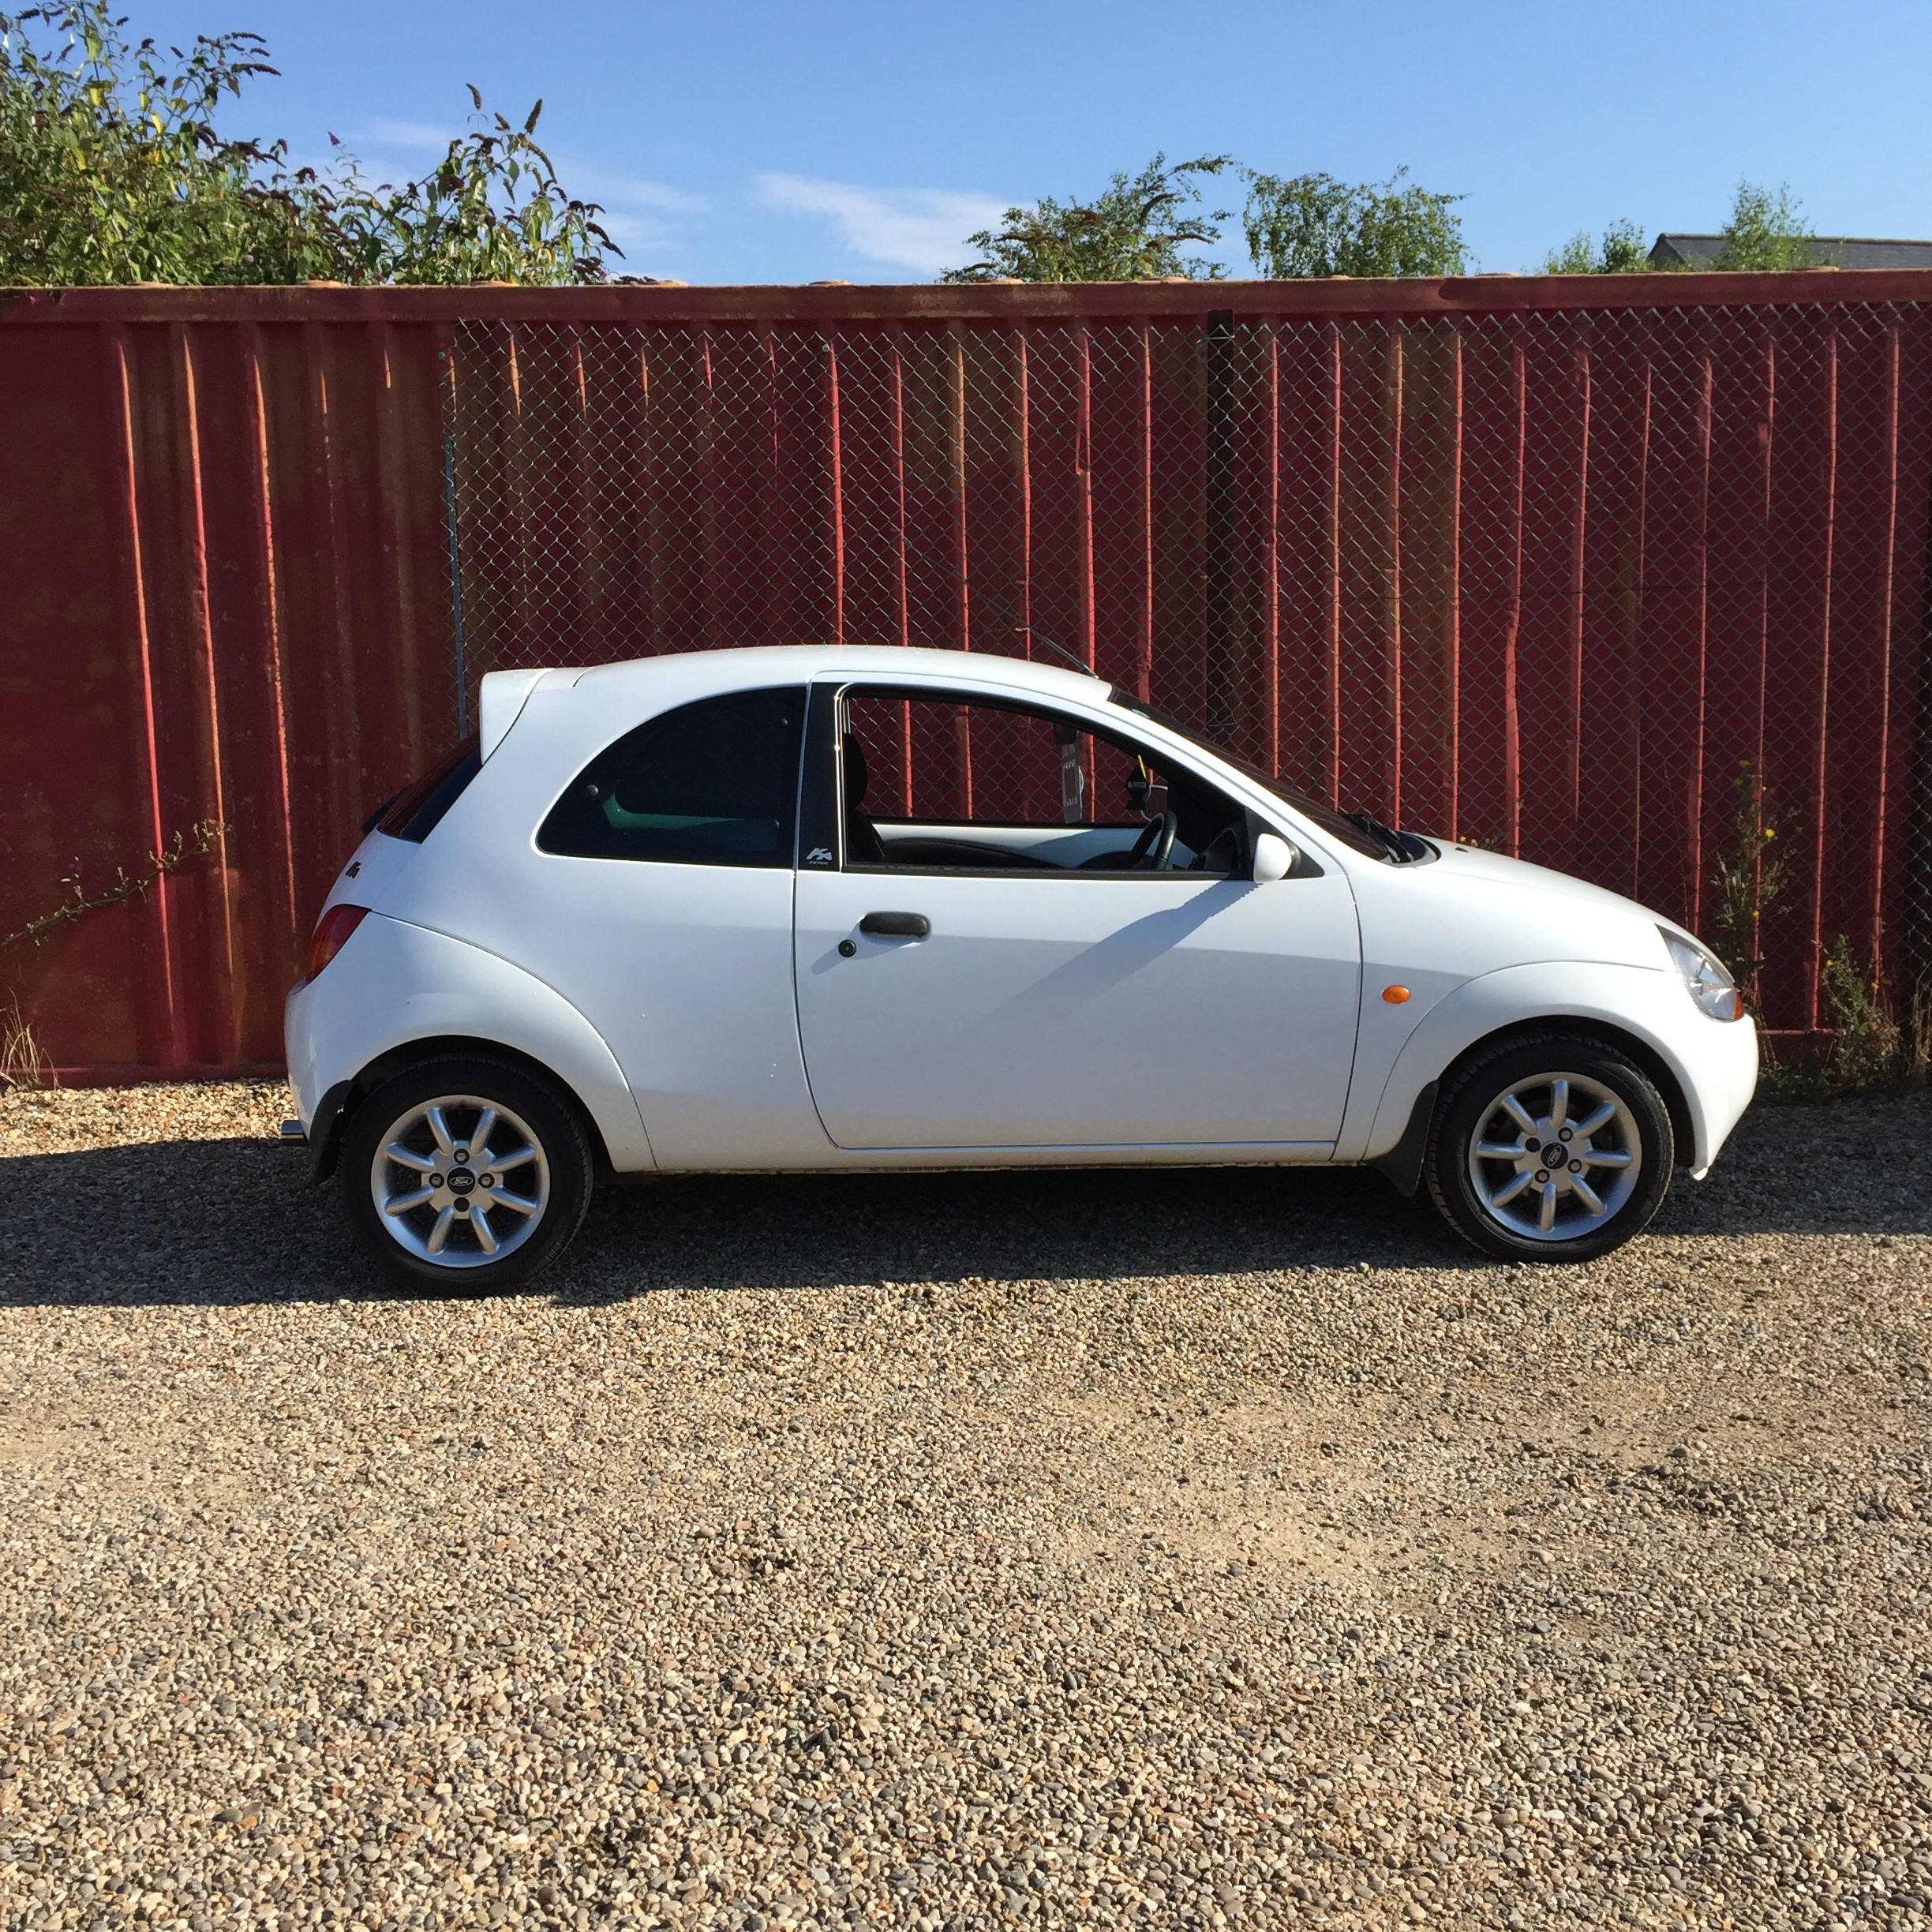 Ford KA 1.3 For sale in Cambridge Call Station Road Garage